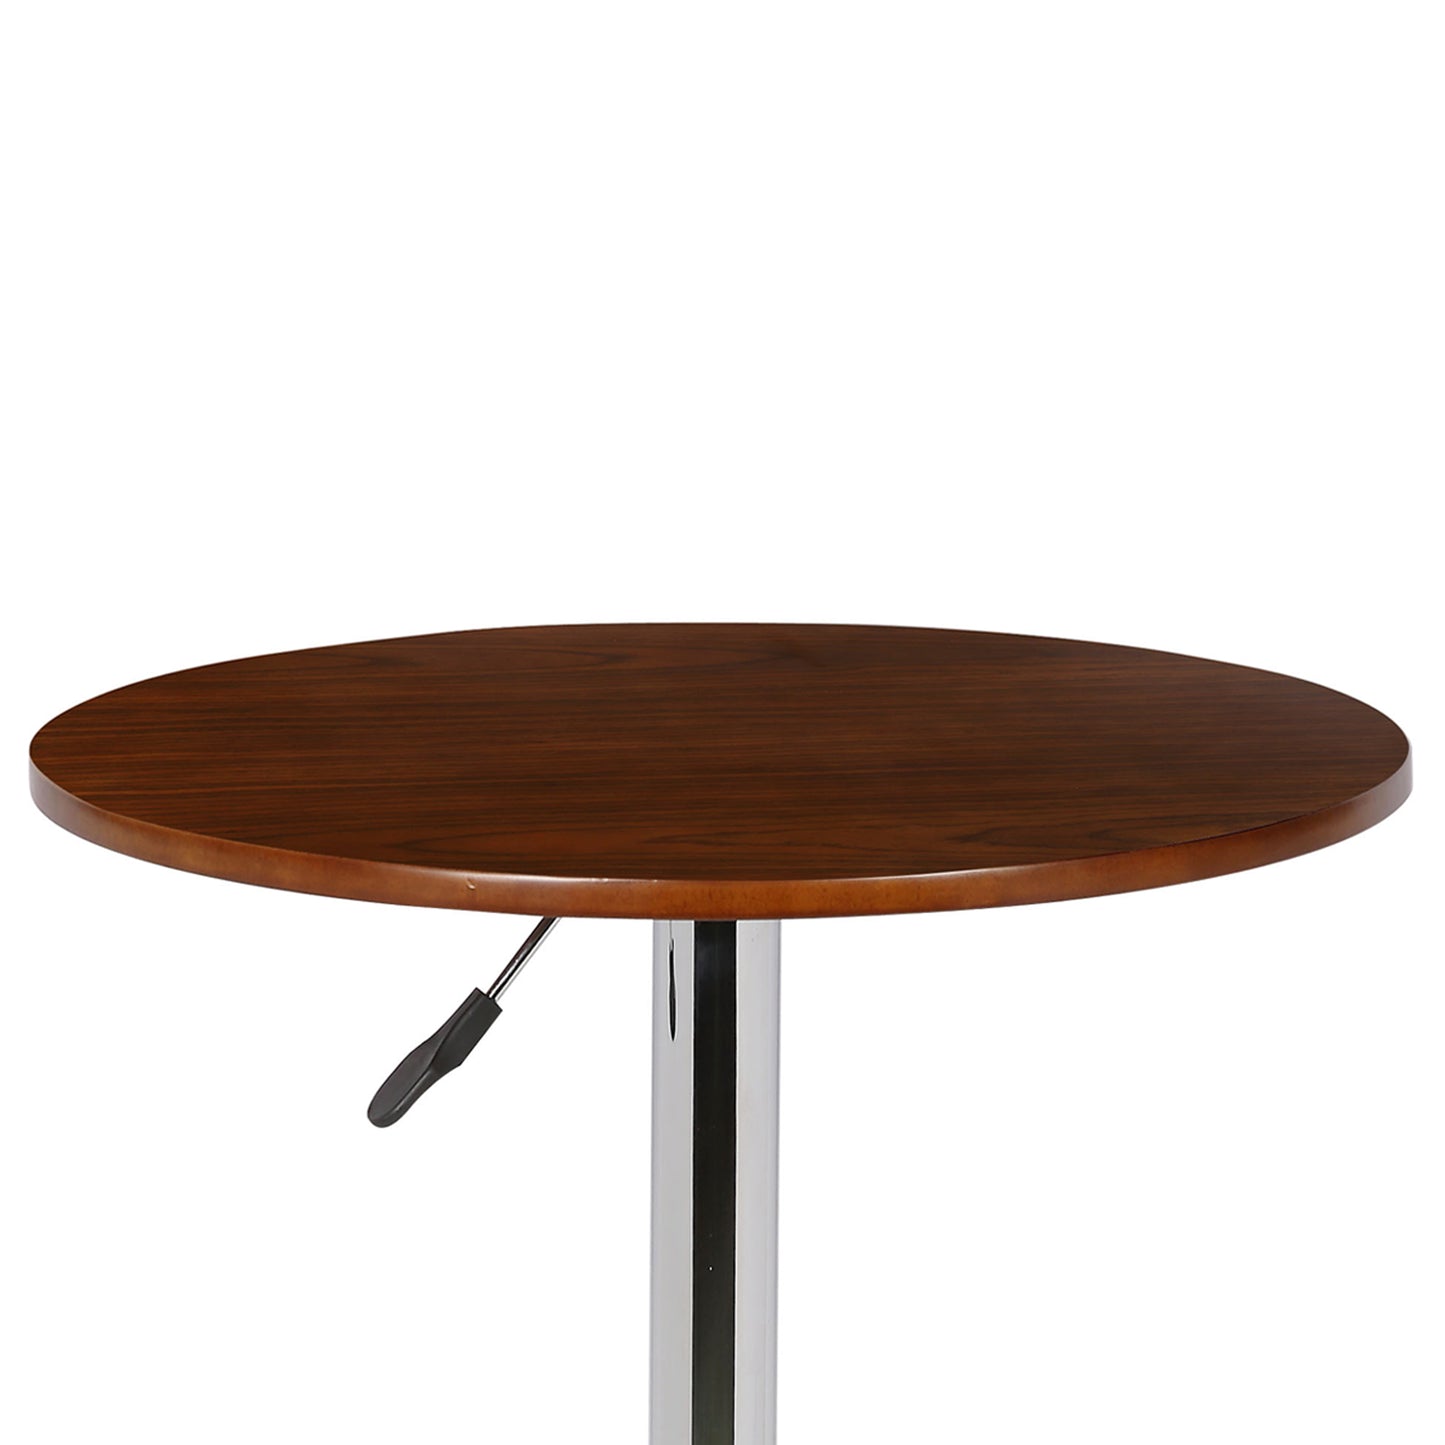 Bentley Adjustable Pub Table in Walnut Wood and Chrome finish